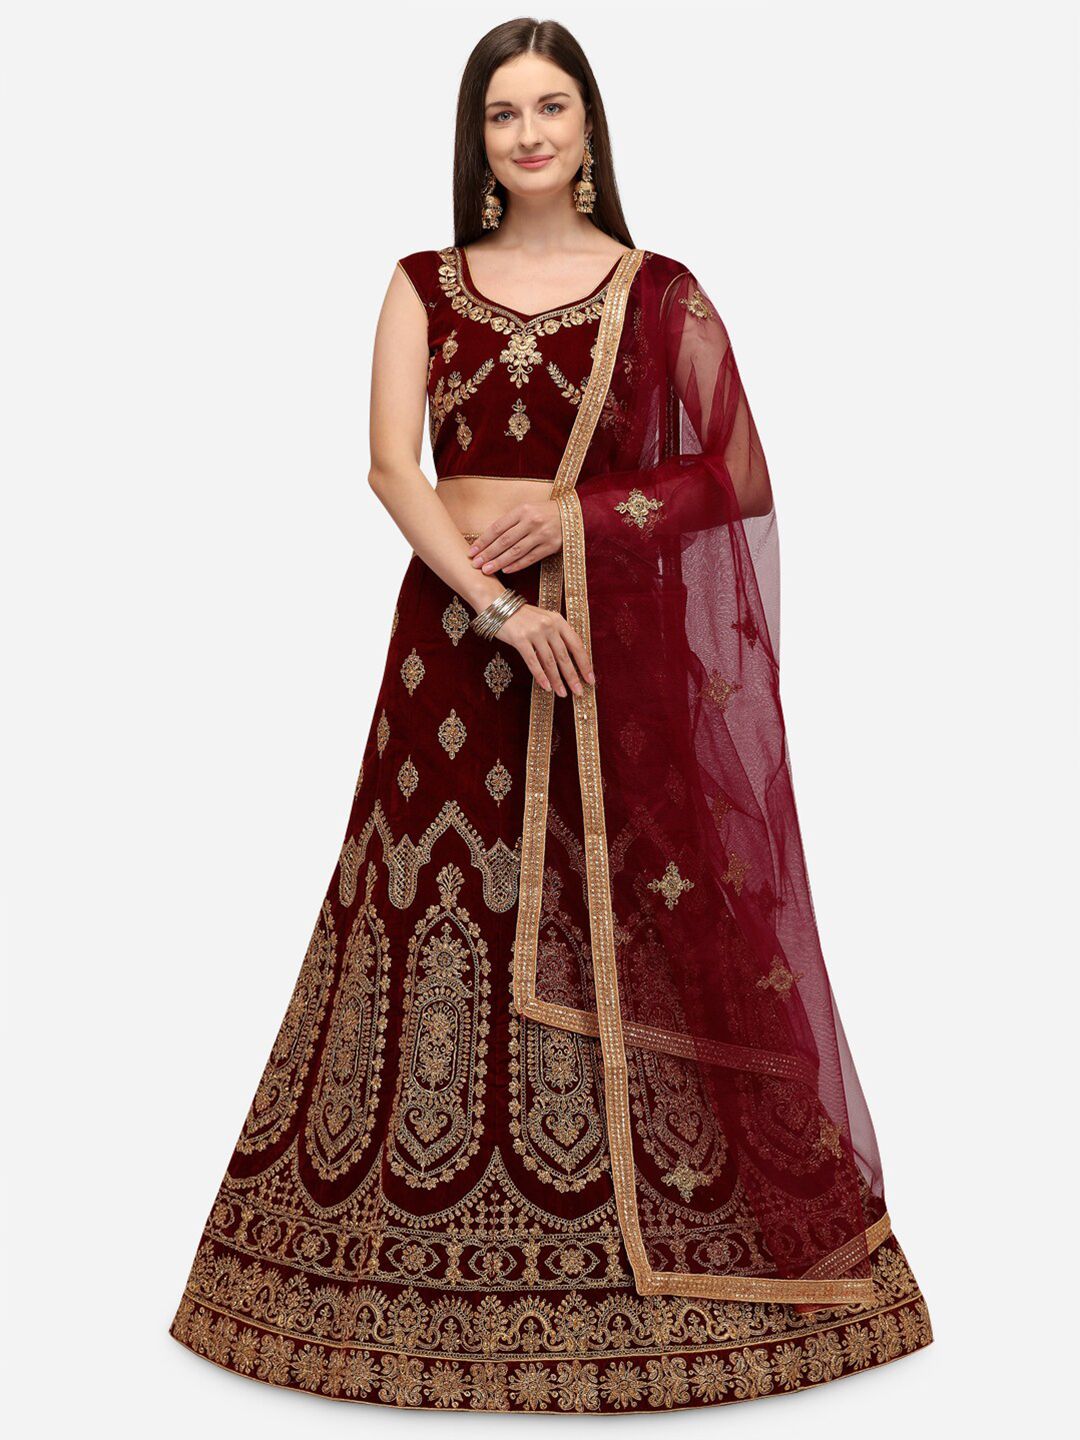 Rajesh Silk Mills Maroon & Gold-Toned Embroidered Semi-Stitched Lehenga & Unstitched Blouse With Dupatta Price in India